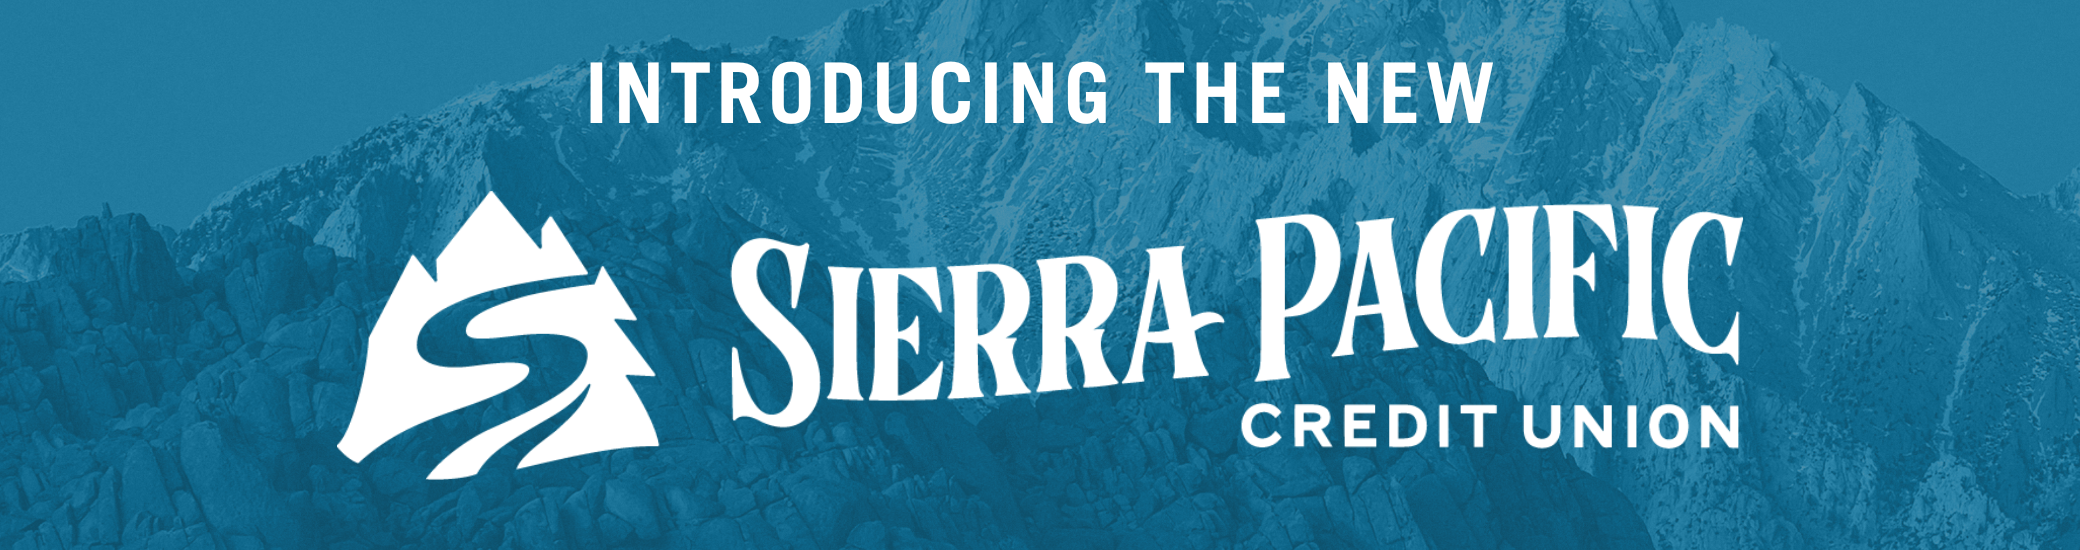 Introducing the new Sierra Pacific Credit Union